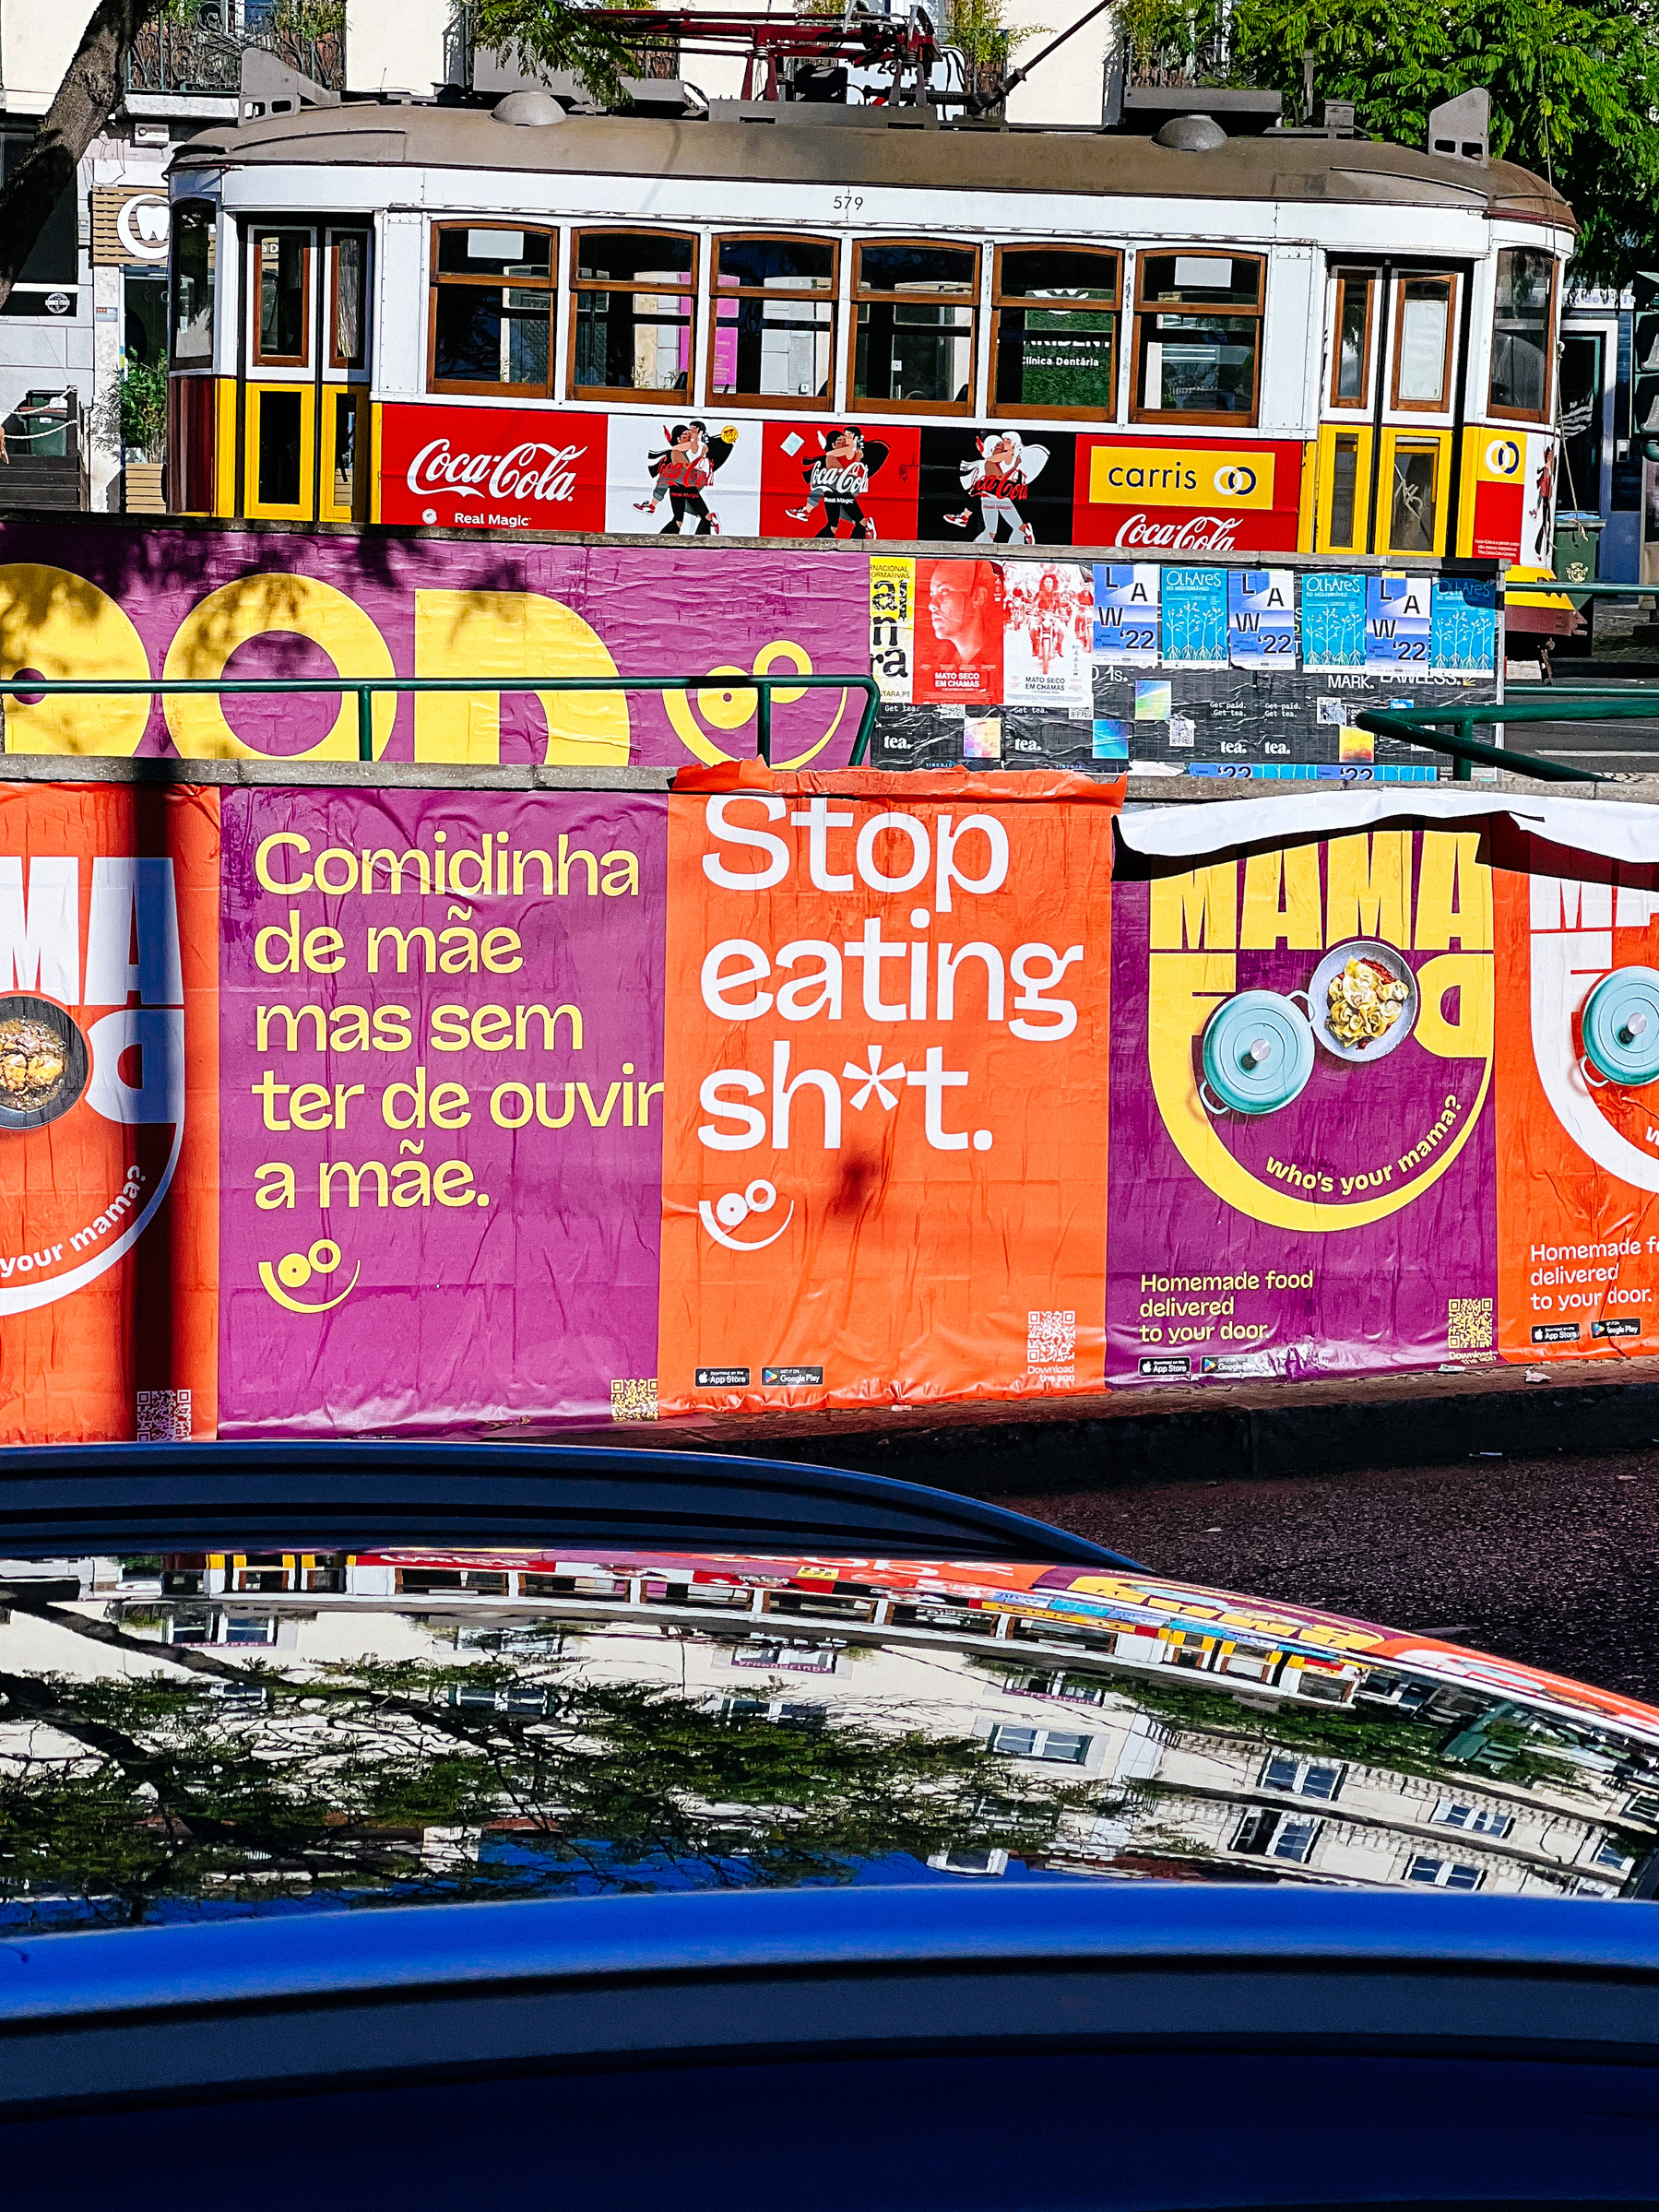 A tram in the background, with posters on a wall in the foreground. One says “stop eating sh*t”